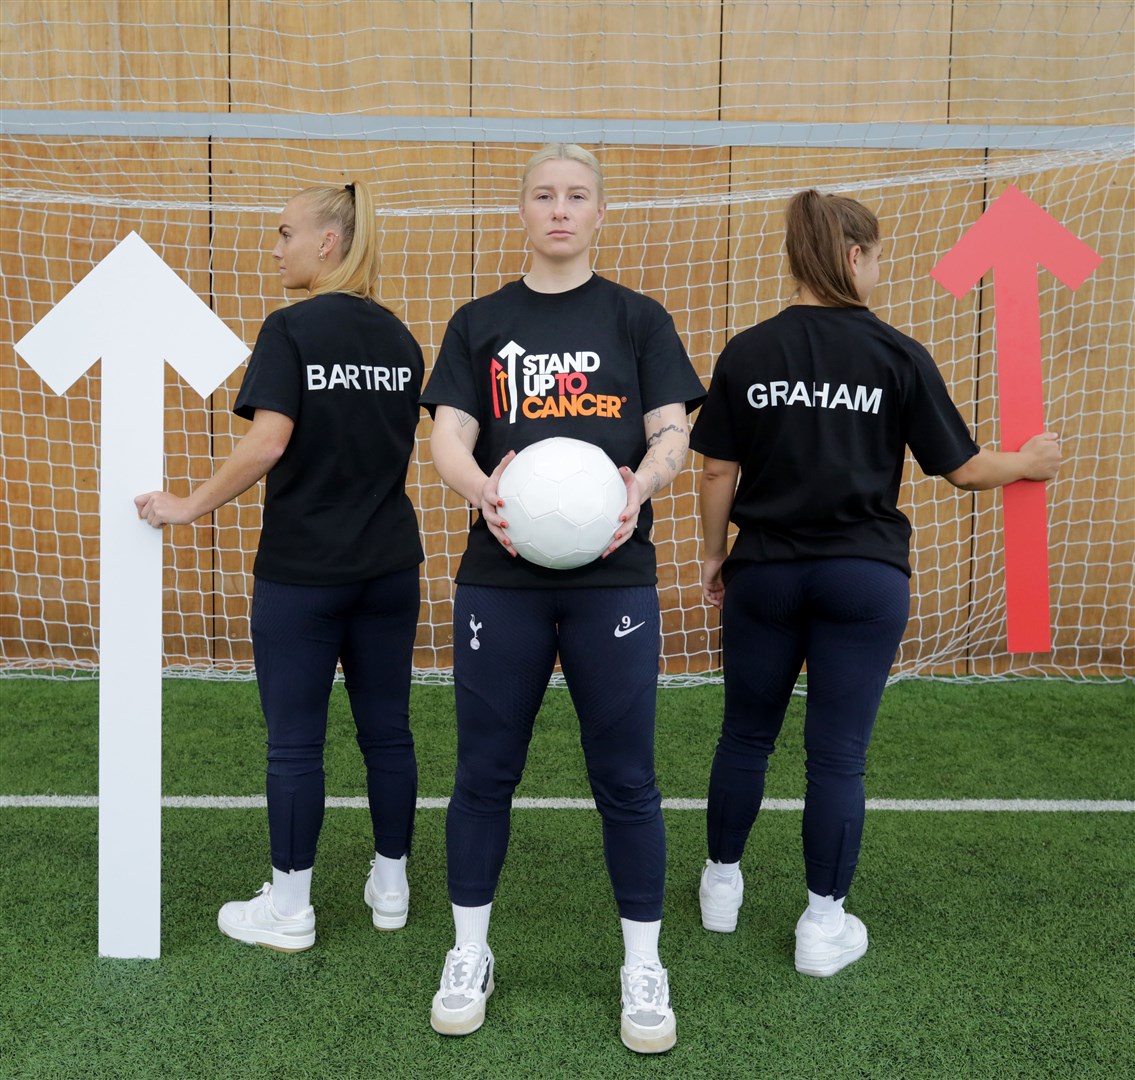 Bethany England (centre) and Spurs teammates Molly Bartrip (left) and Kit Graham (right) back the Stand Up To Cancer campaign by Cancer Research UK and Channel 4 (Cancer Research UK)